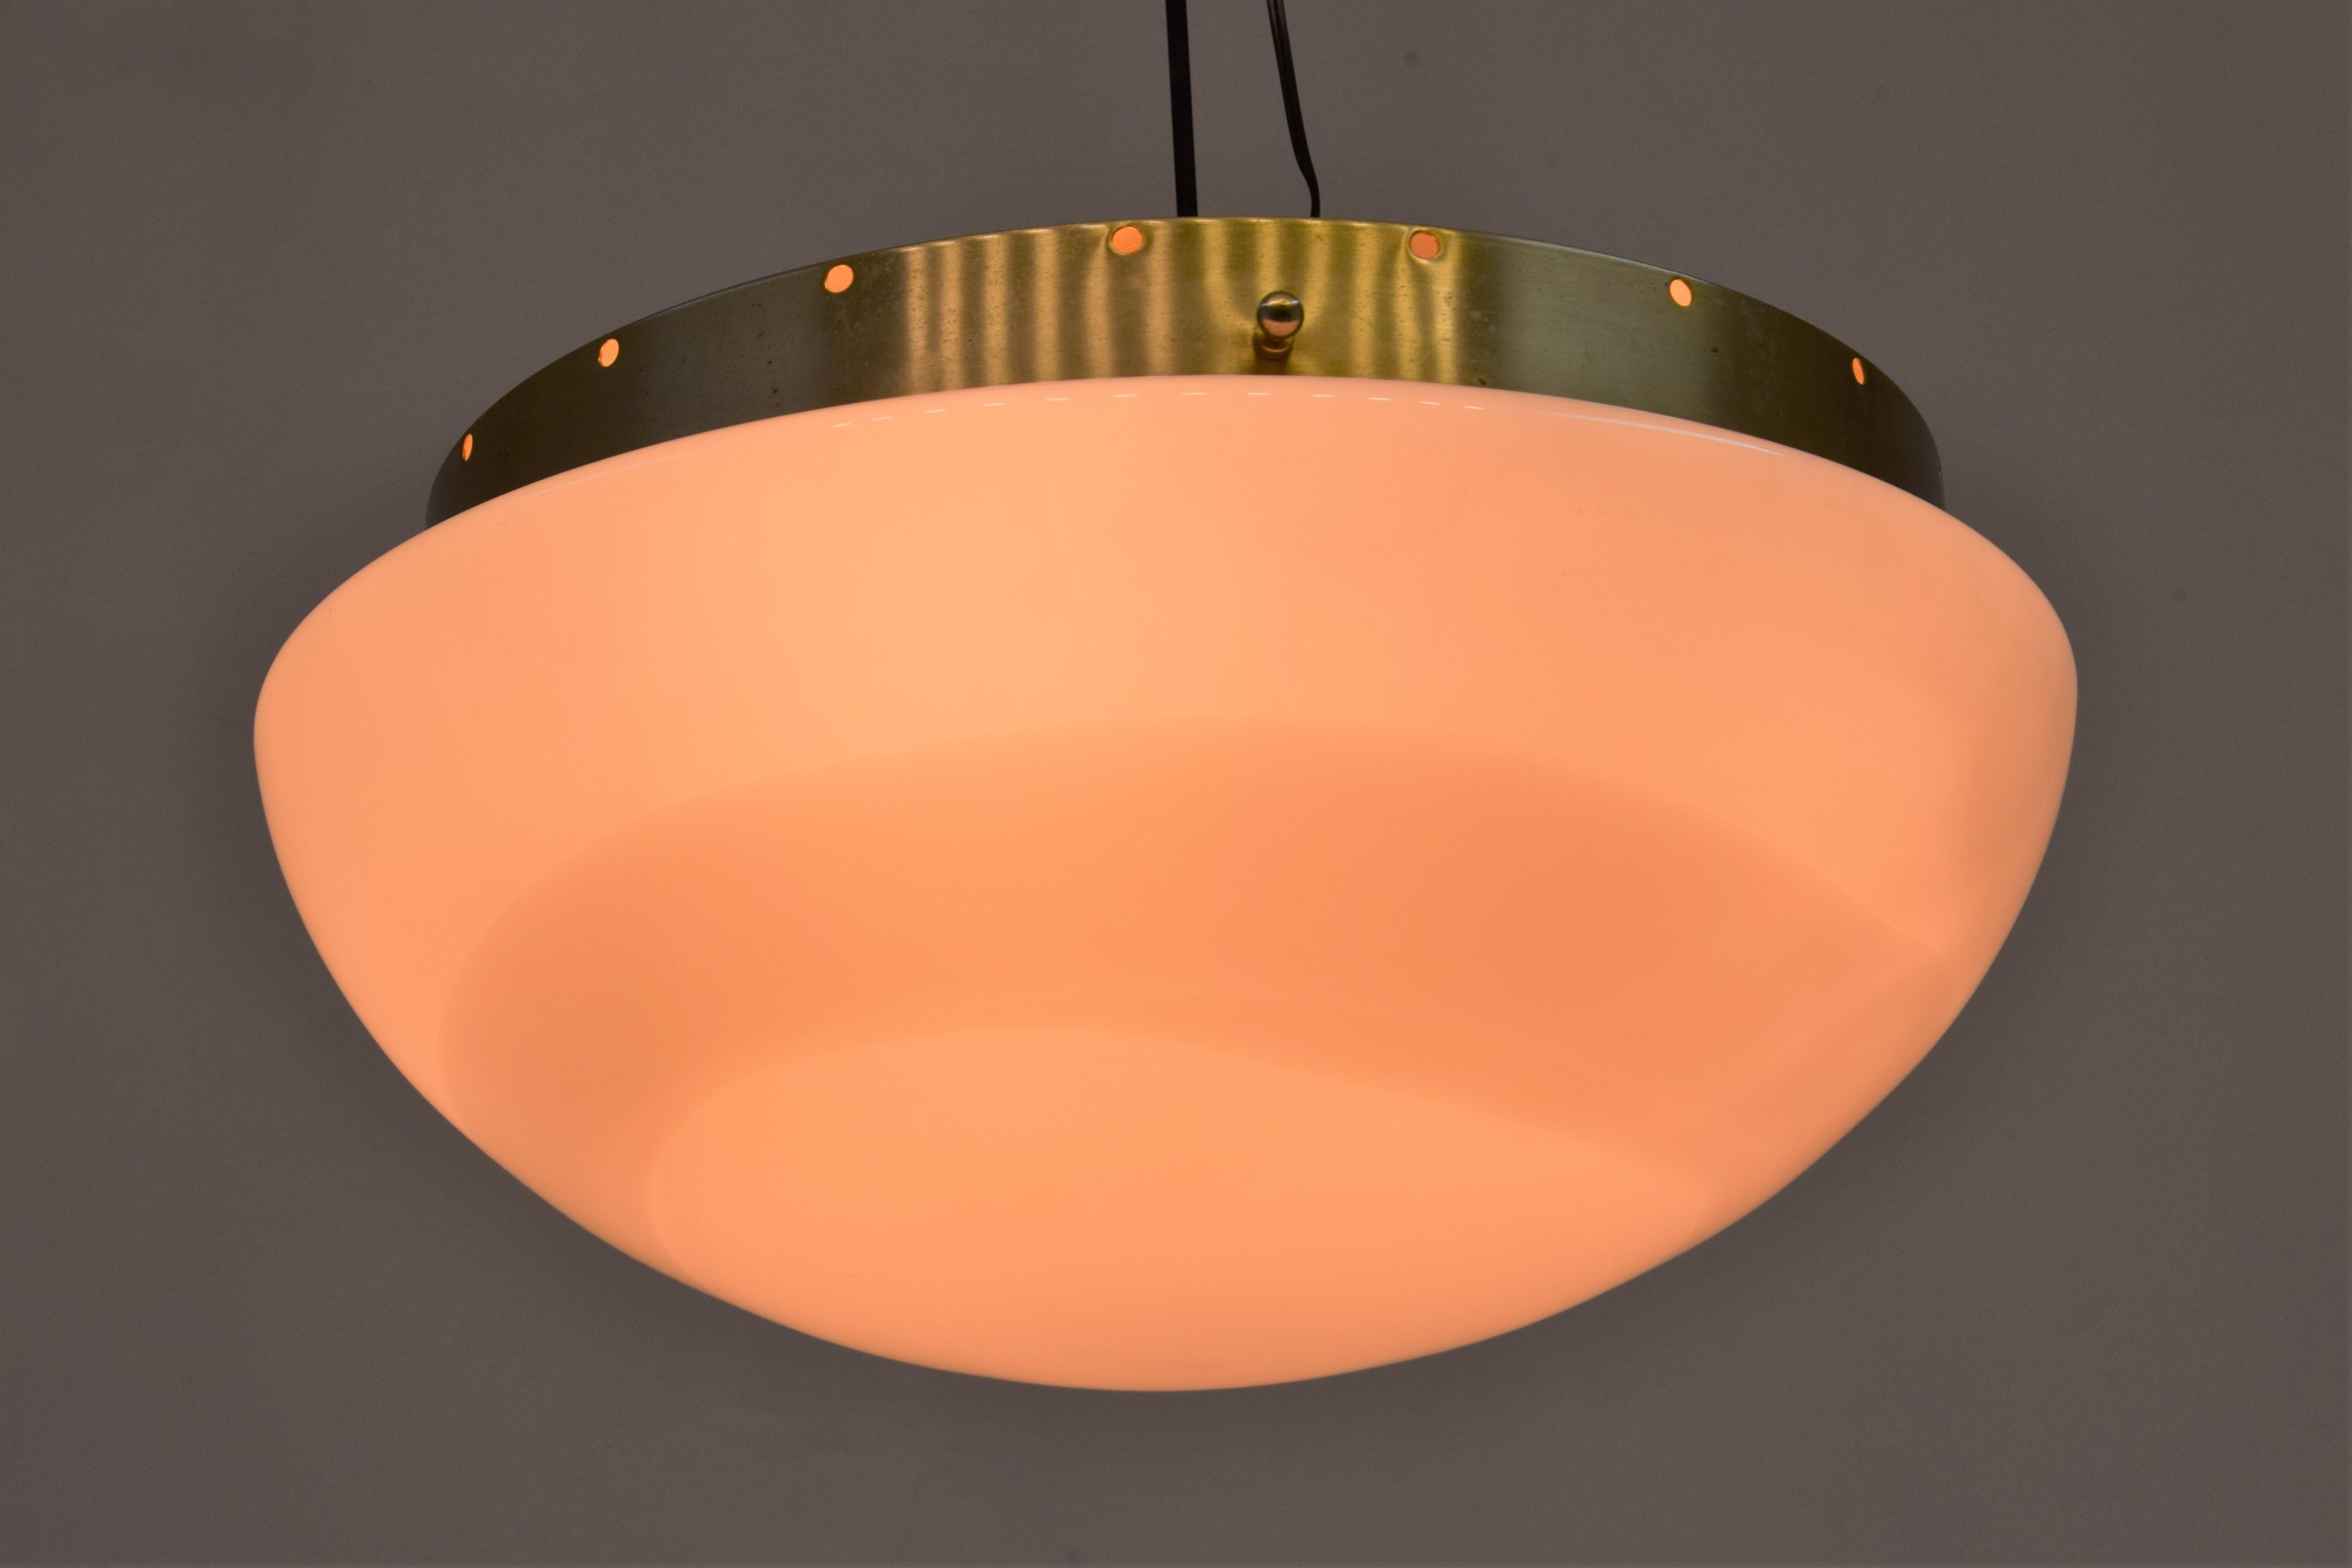 Mid-20th Century Italian Ceiling Lamp, Brass and Glass, 1960s For Sale